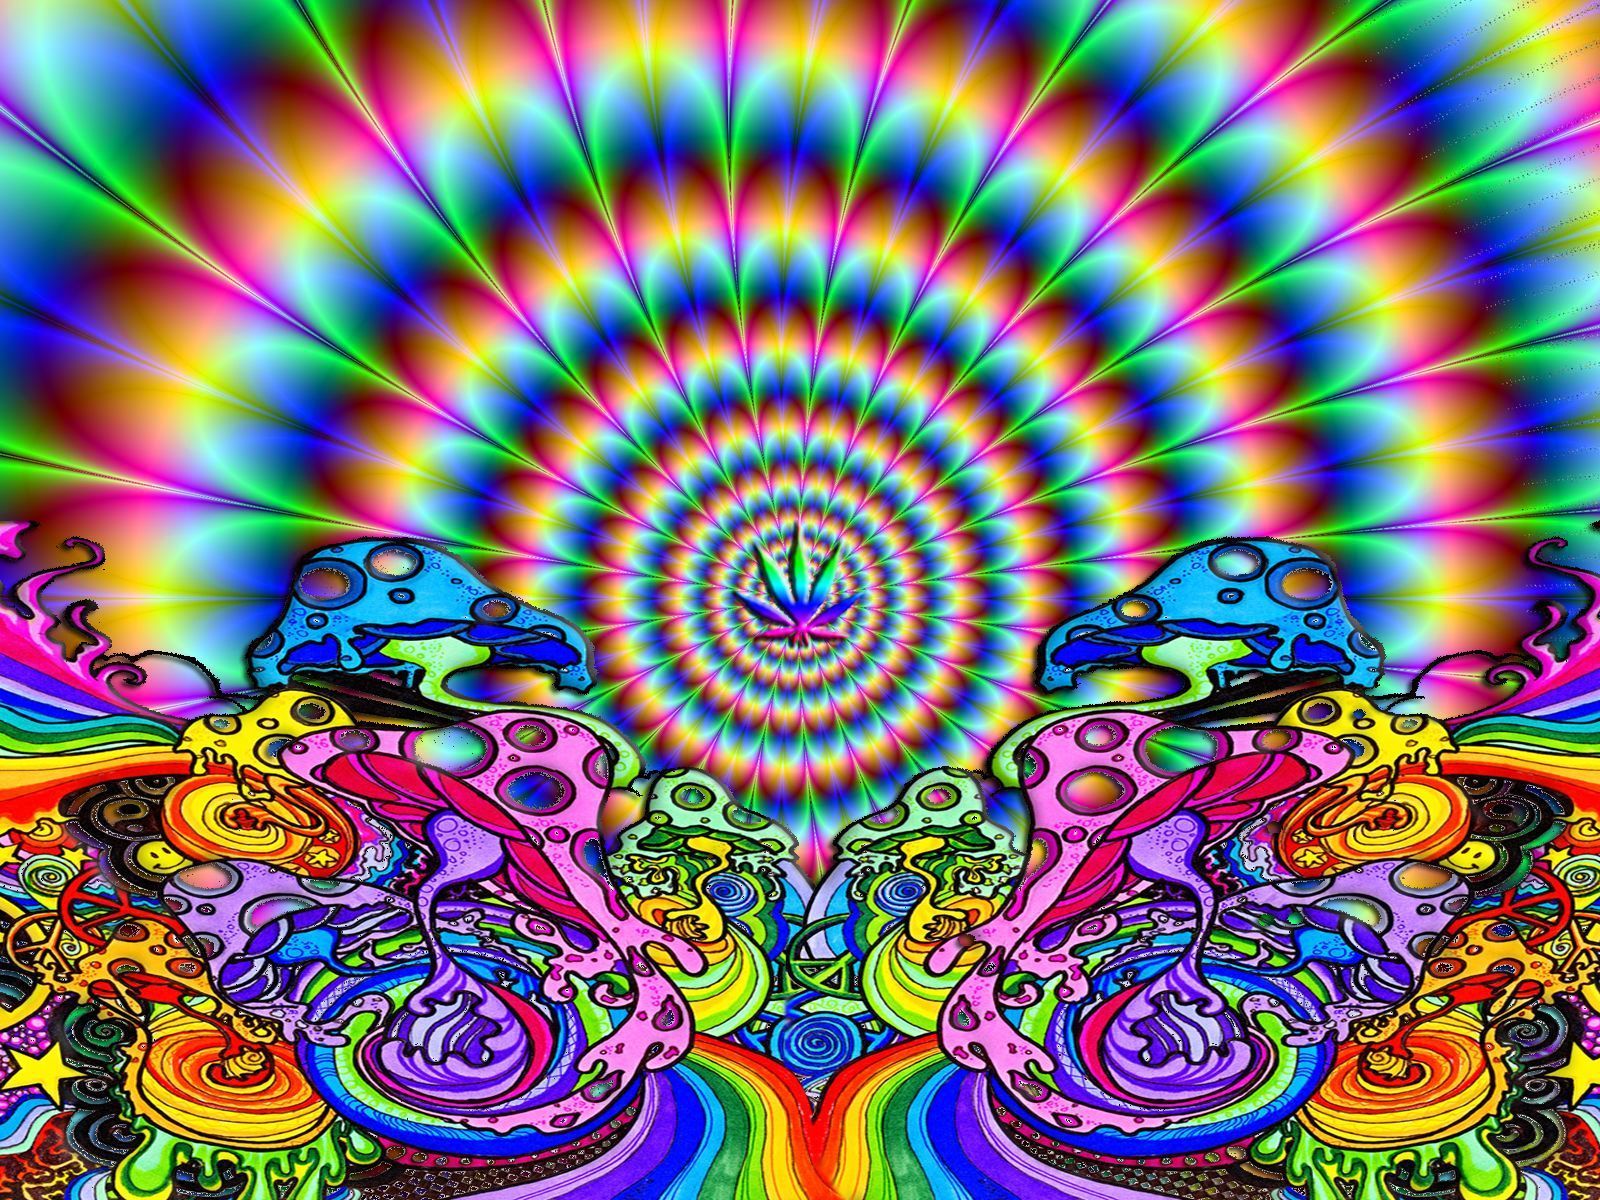 A psychedelic artwork with many colors and shapes - Weed